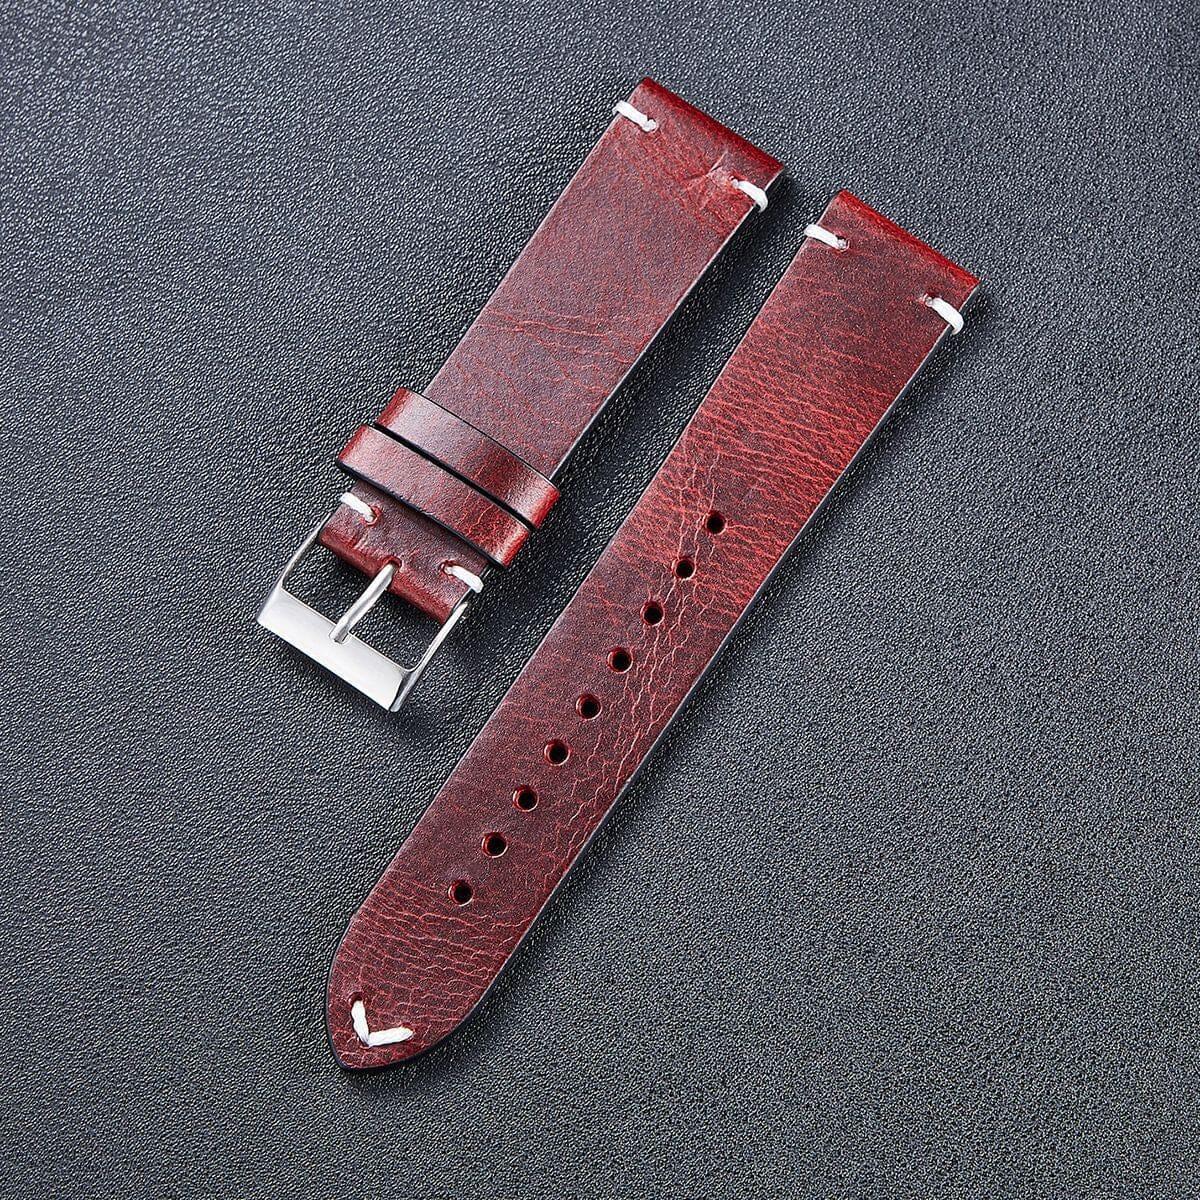 Vintage Oiled Leather Watch Straps Compatible with the Garmin Instinct 2x